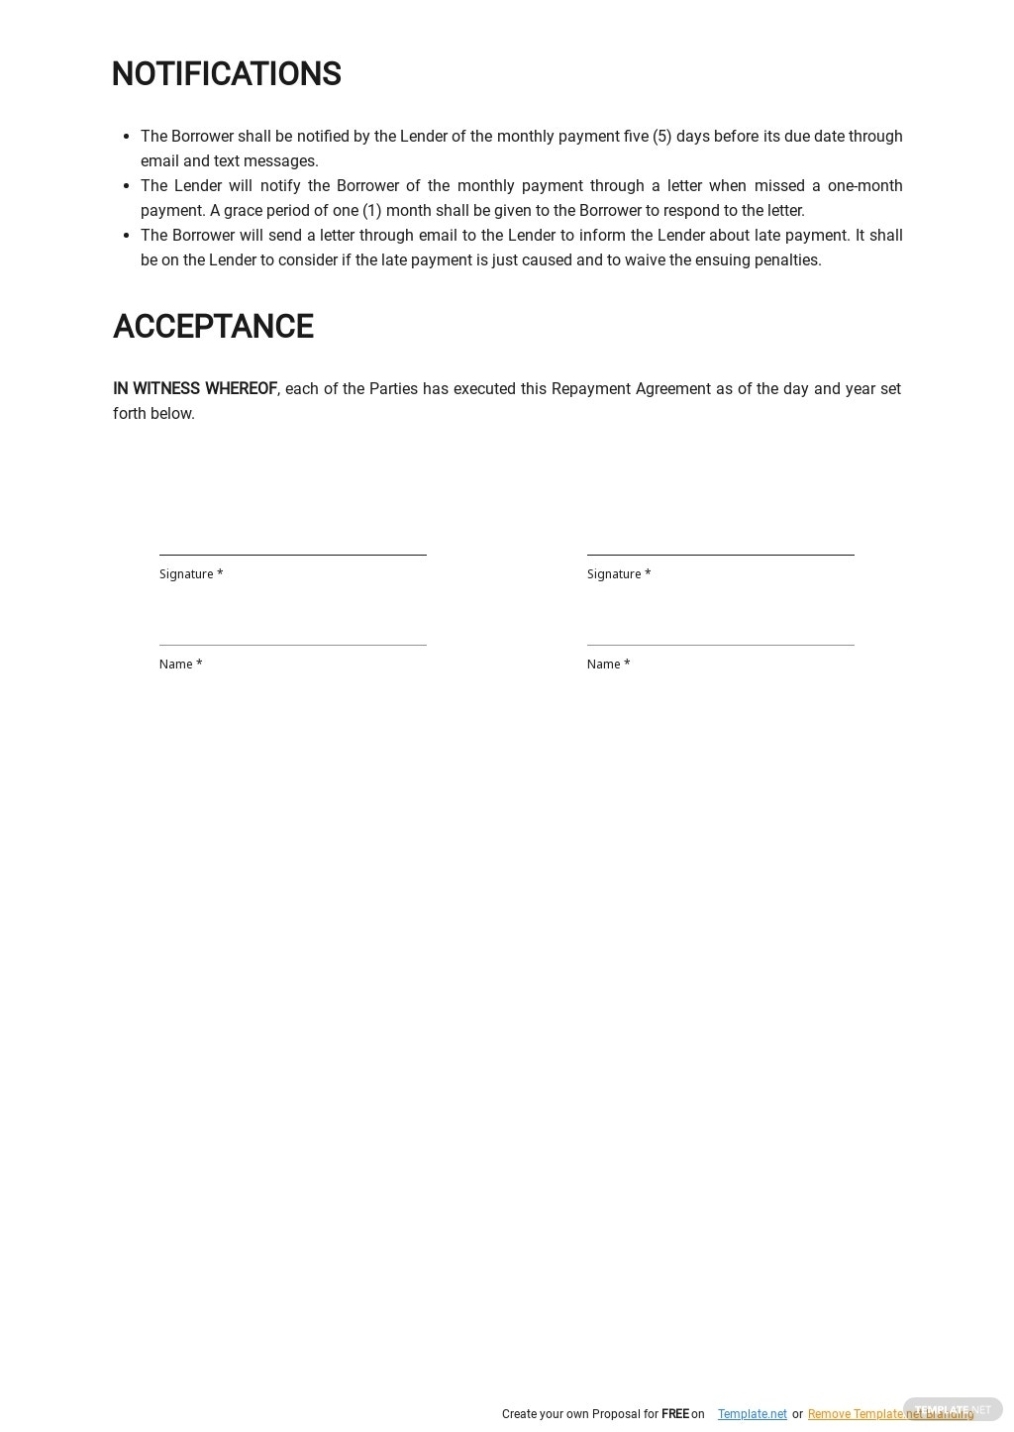 Loan Repayment Agreement Template - Google Docs, Word, Apple Pages inside Personal Loan Repayment Agreement Template